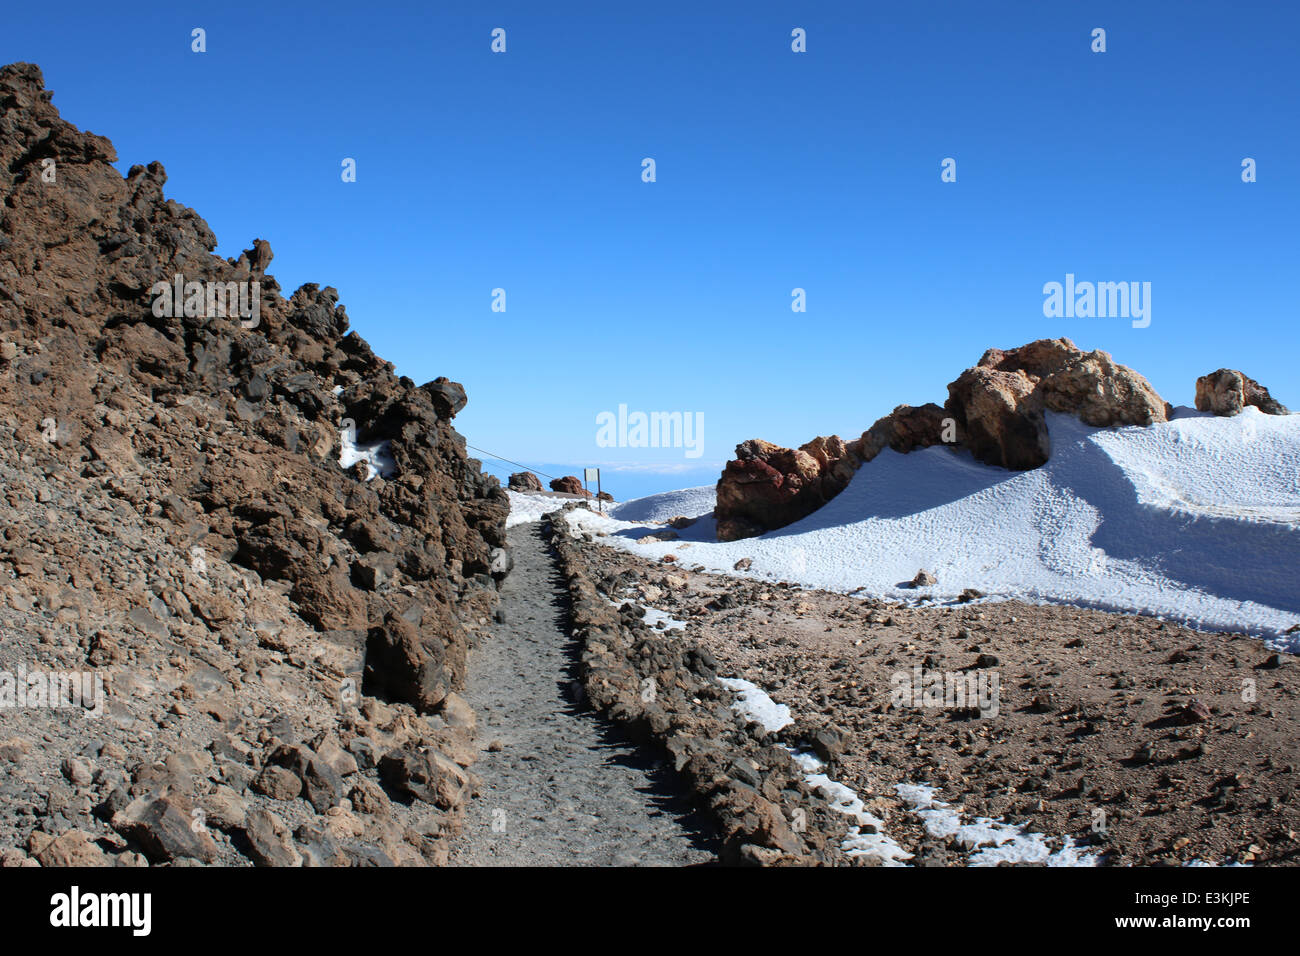 Hiking through snow at 3500m on the mountain peak of El Teide Volcano, highest summit on the Spanish Canary island of Tenerife Stock Photo